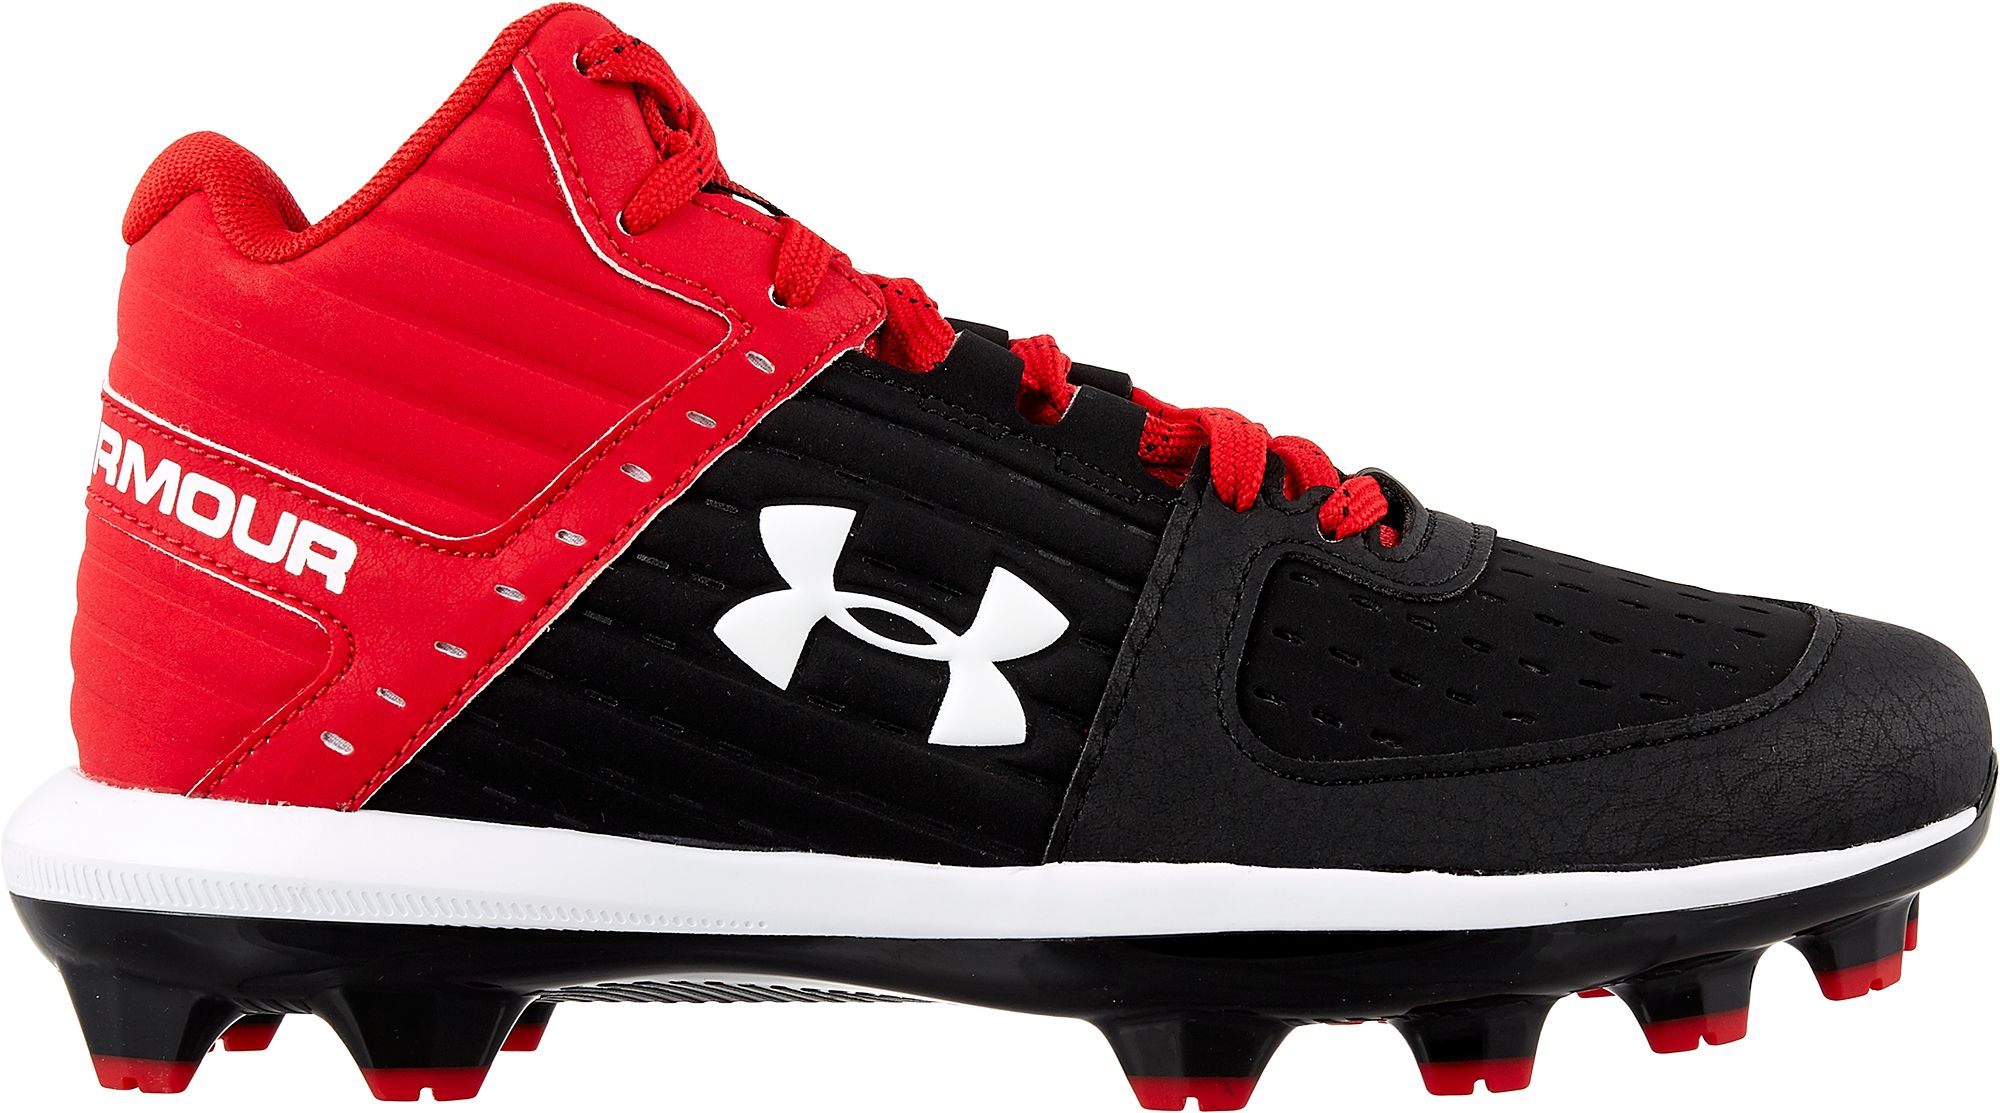 red and black under armour cleats